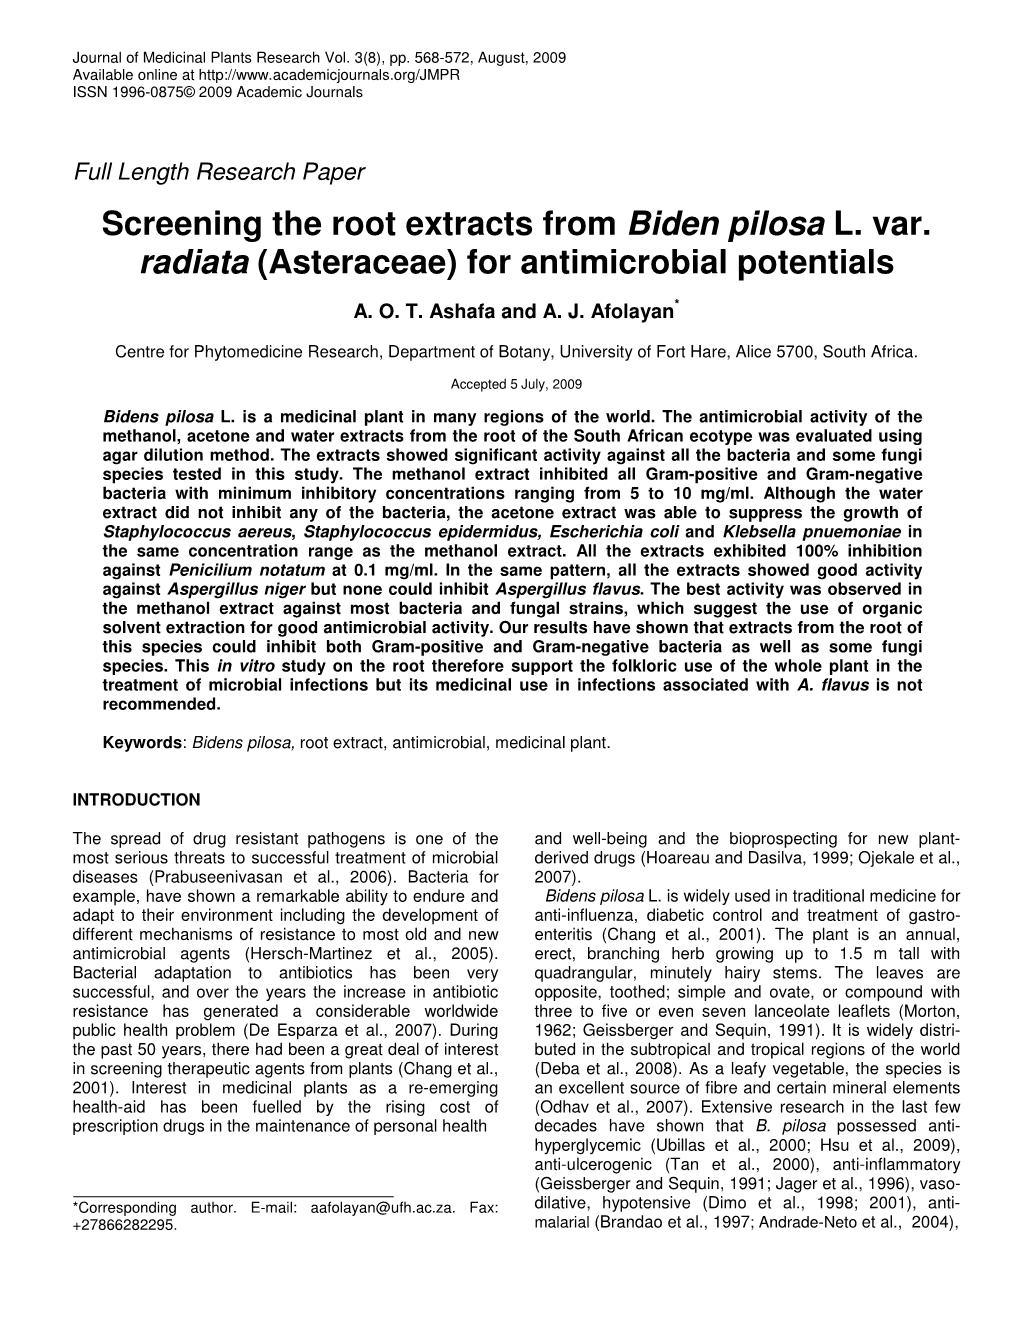 Screening the Root Extracts from Biden Pilosa L. Var